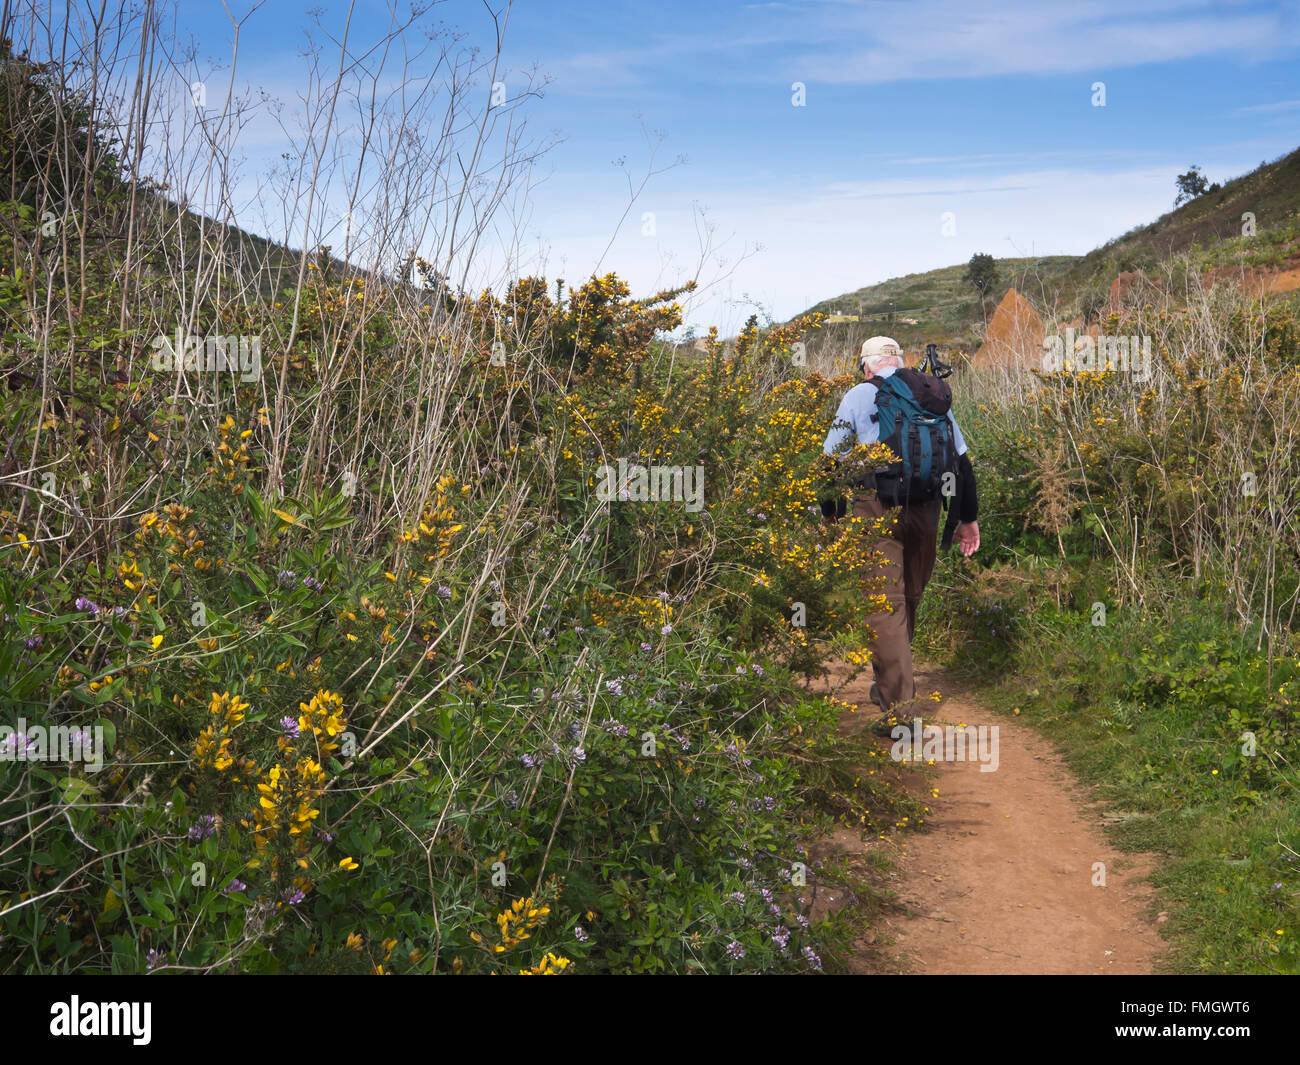 Footpath with gorse, Arabian pea and male hiker around  'Charcas del Erjos' Tenerife Canary Islands Spain Stock Photo